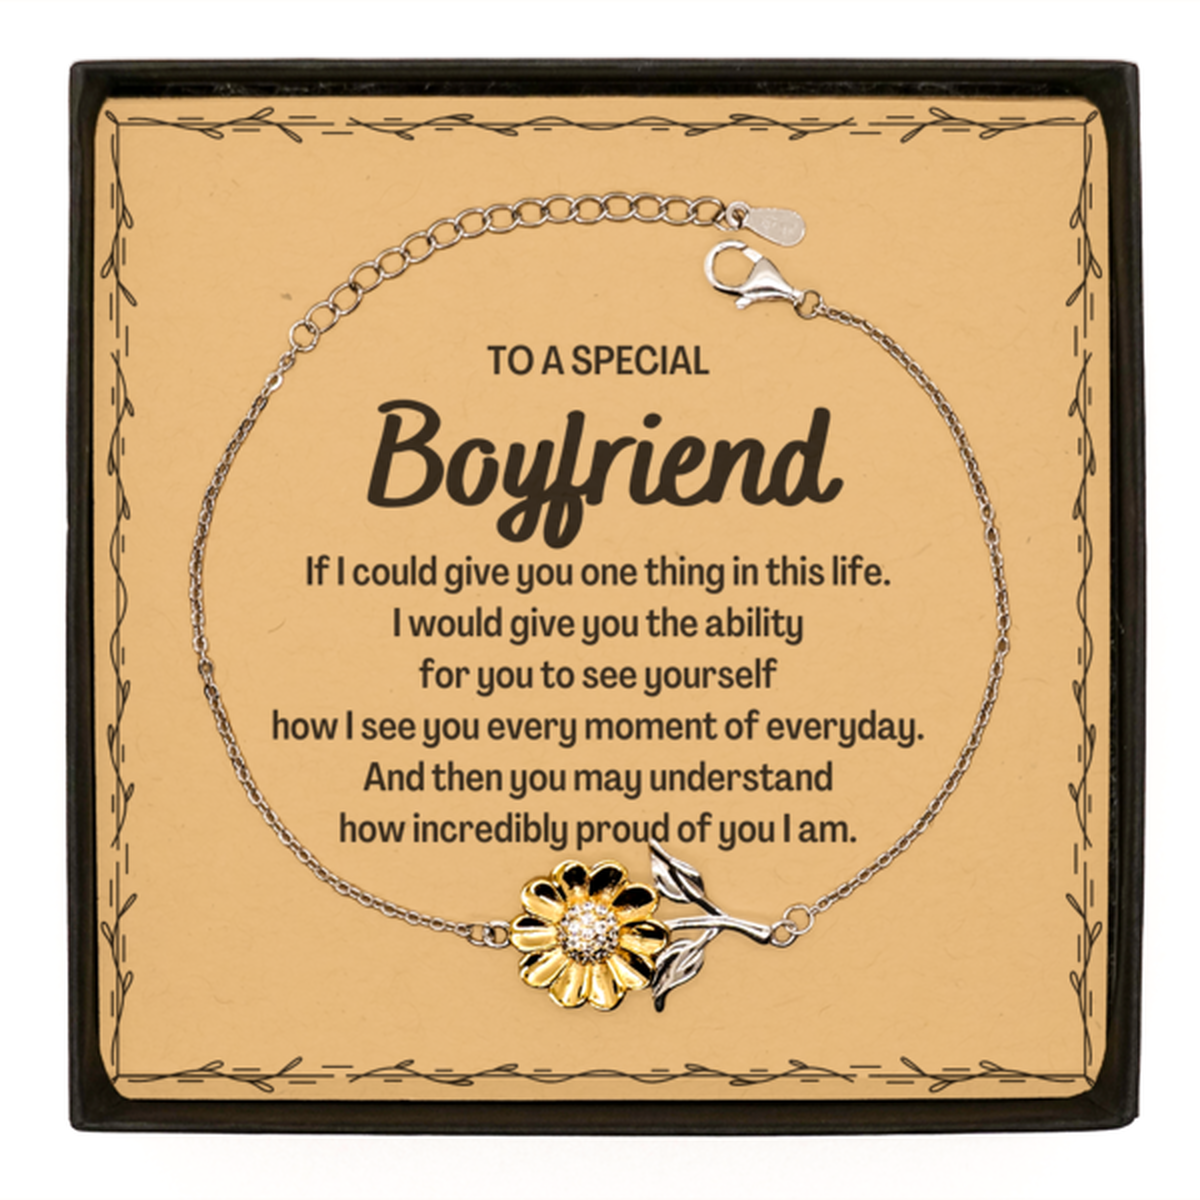 To My Boyfriend Sunflower Bracelet, Gifts For Boyfriend Message Card, Inspirational Gifts for Christmas Birthday, Epic Gifts for Boyfriend To A Special Boyfriend how incredibly proud of you I am